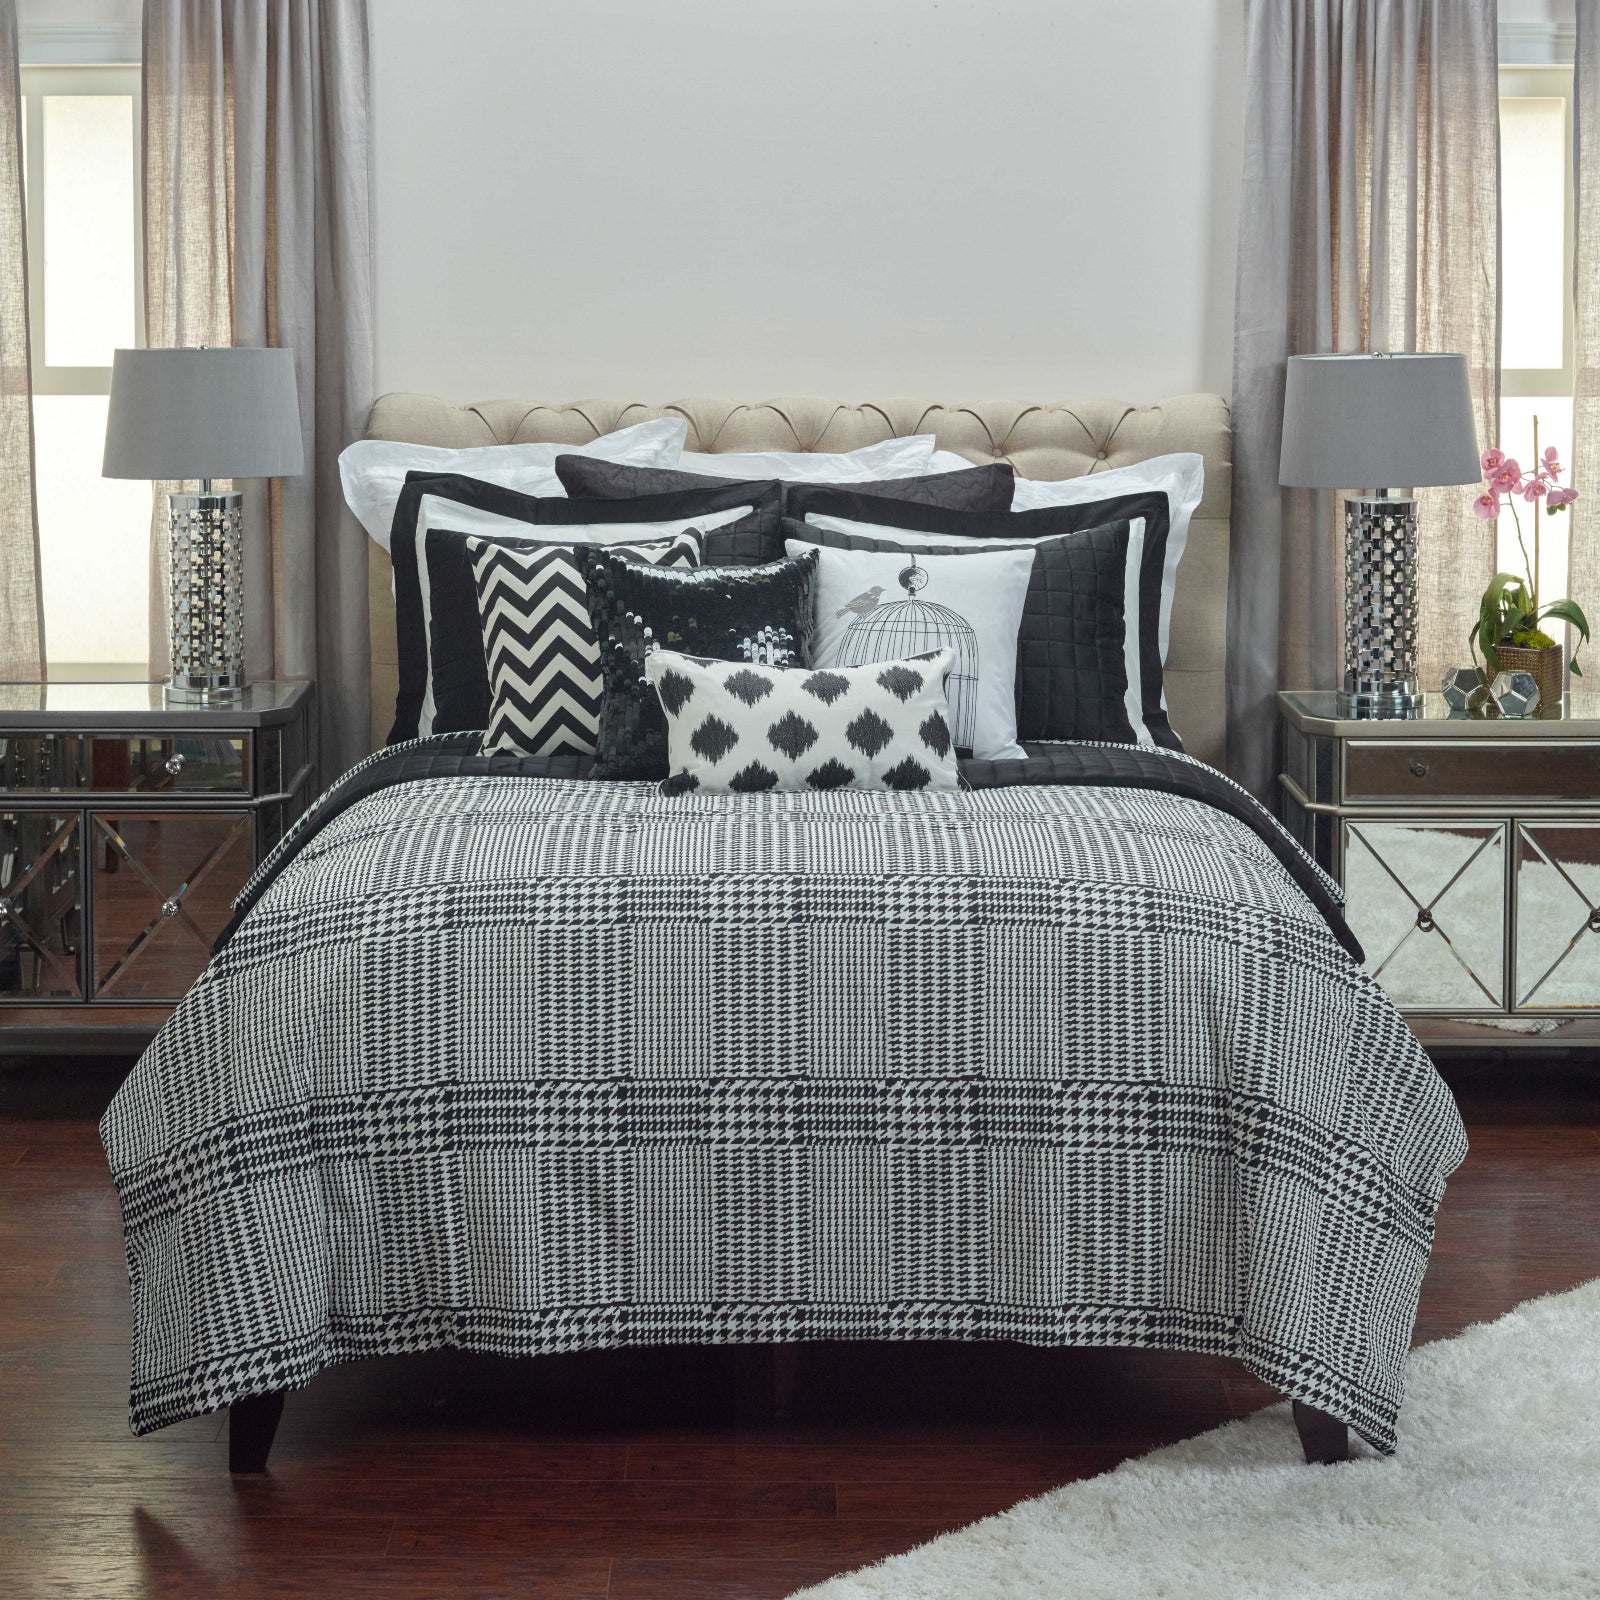 Rizzy BT1282 Houndstooth Black Bedding main image